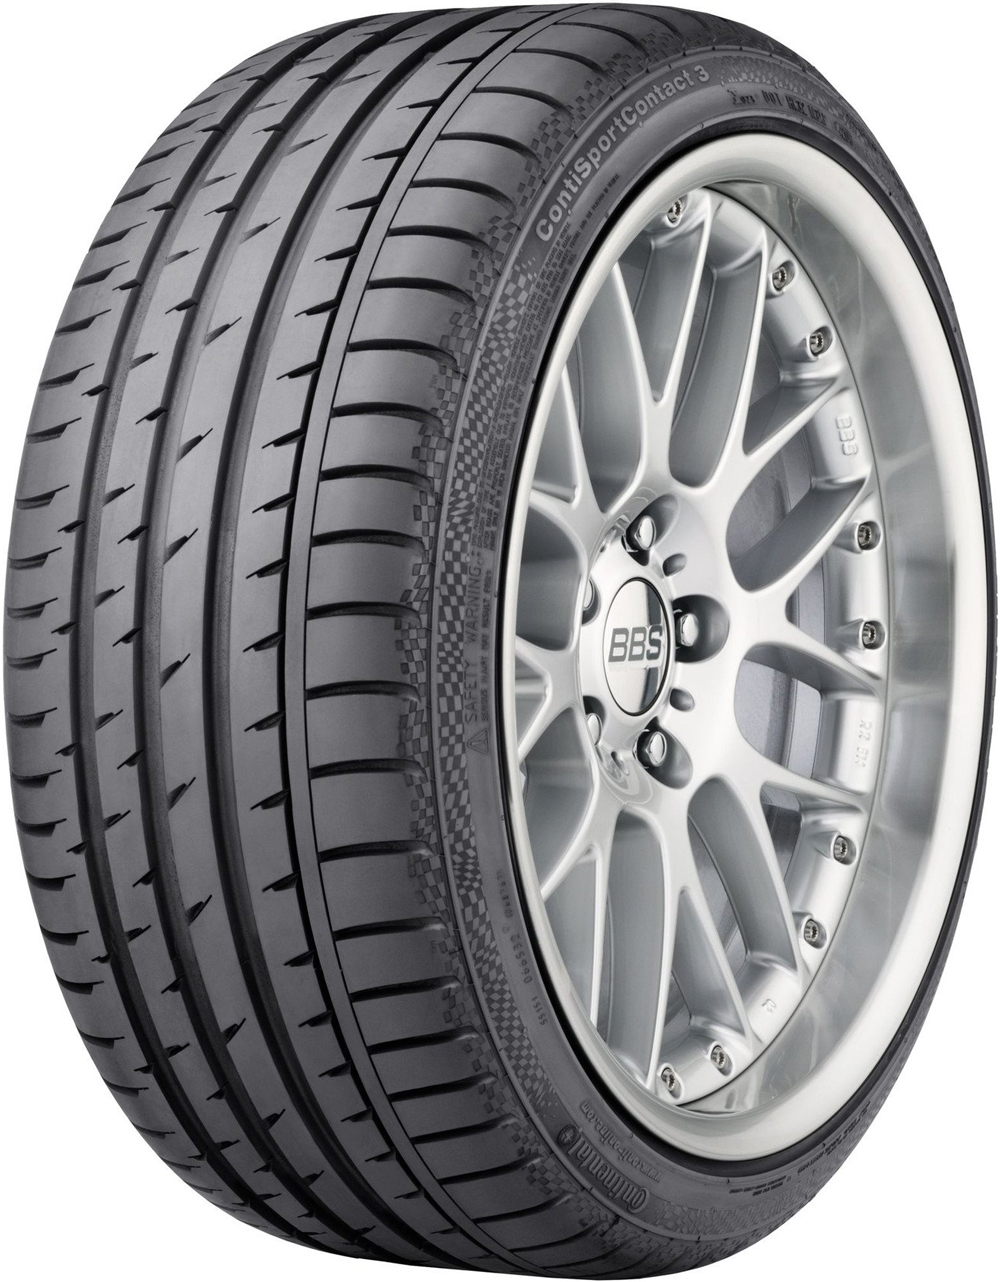 Anvelope auto CONTINENTAL Conti Sport Contact 3 RFT BMW 275/40 R18 99